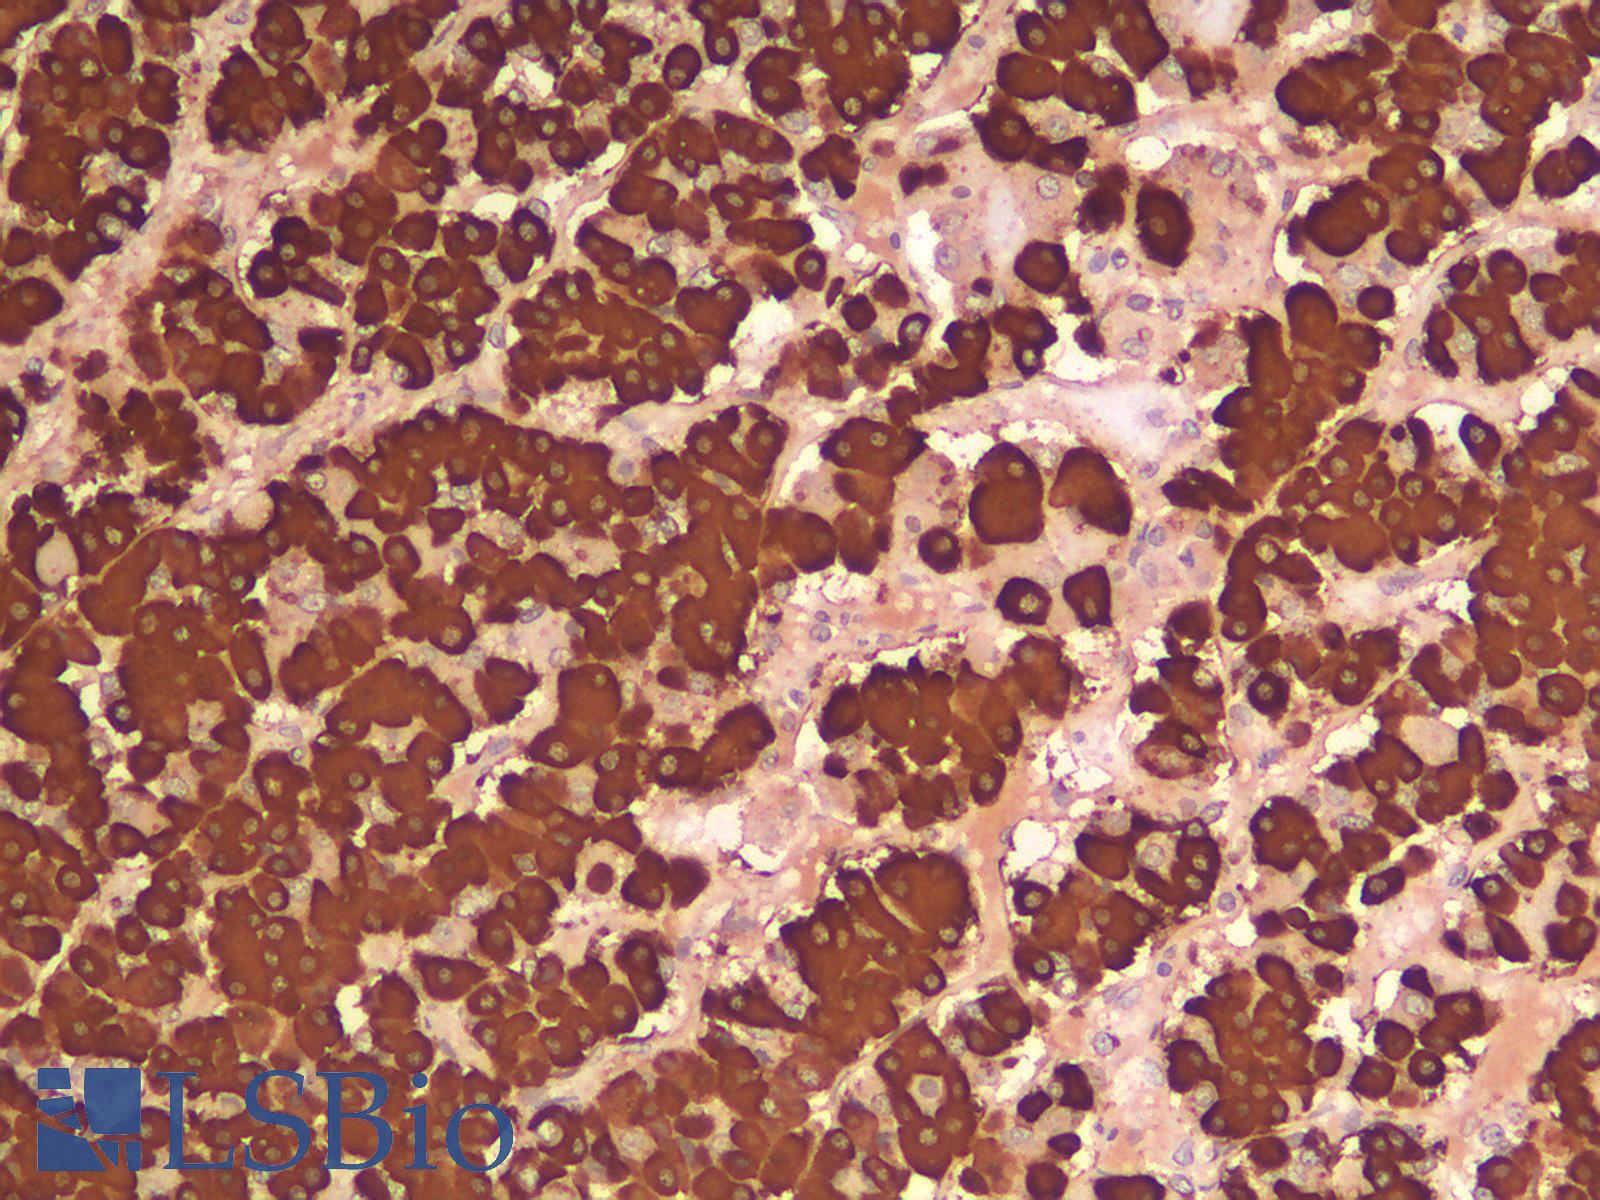 GH / Growth Hormone Antibody - Human Pituitary: Formalin-Fixed, Paraffin-Embedded (FFPE)